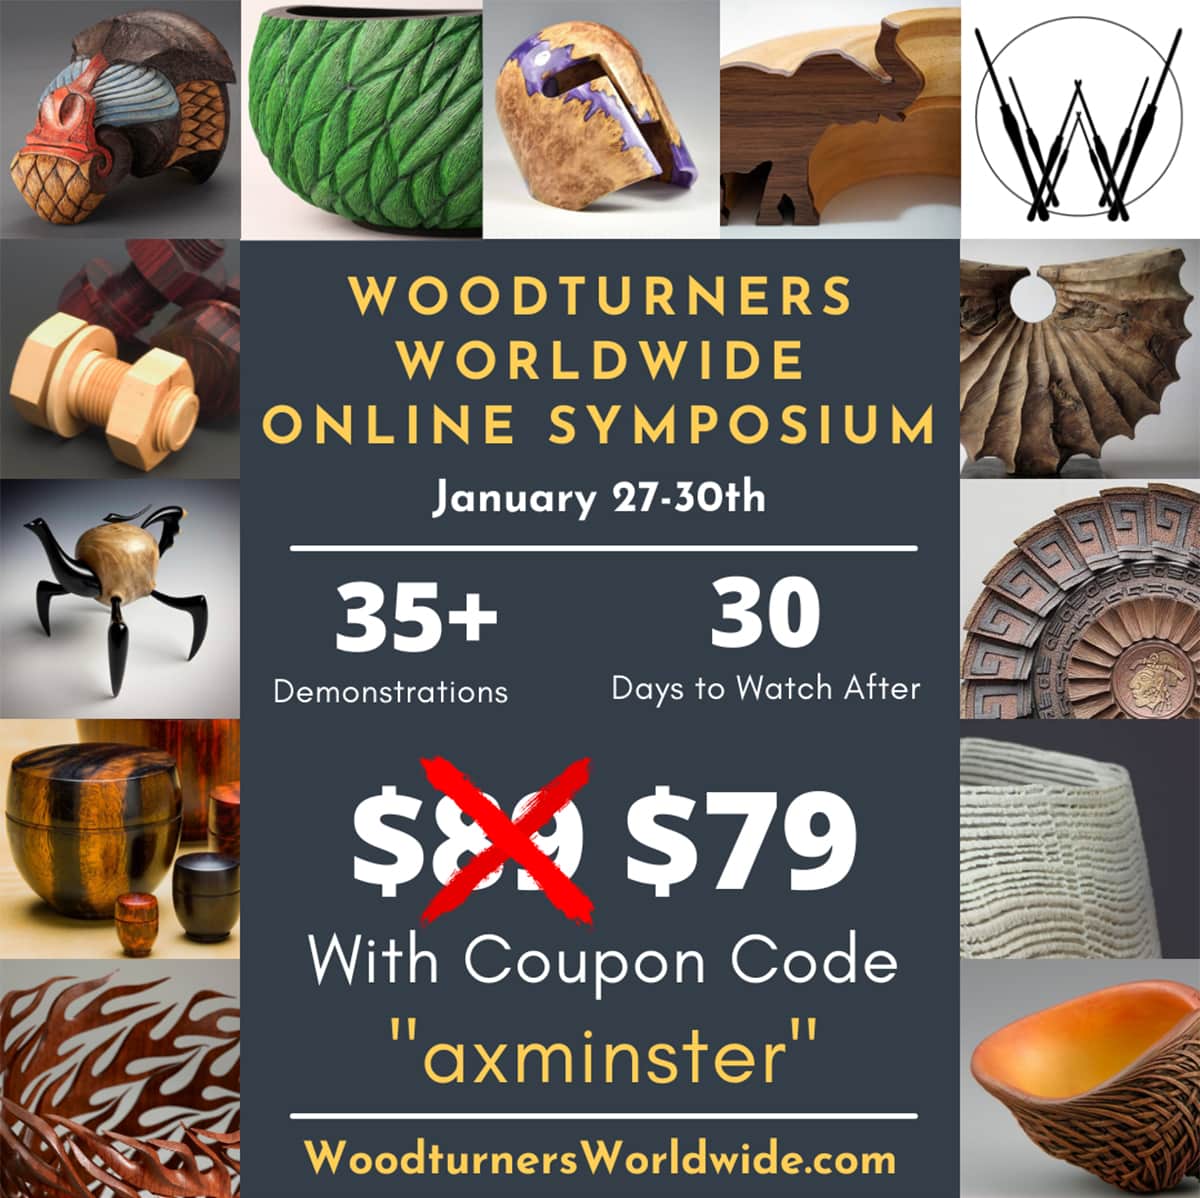 Woodturners Worldwide Online Symposium - January 27th - 30th